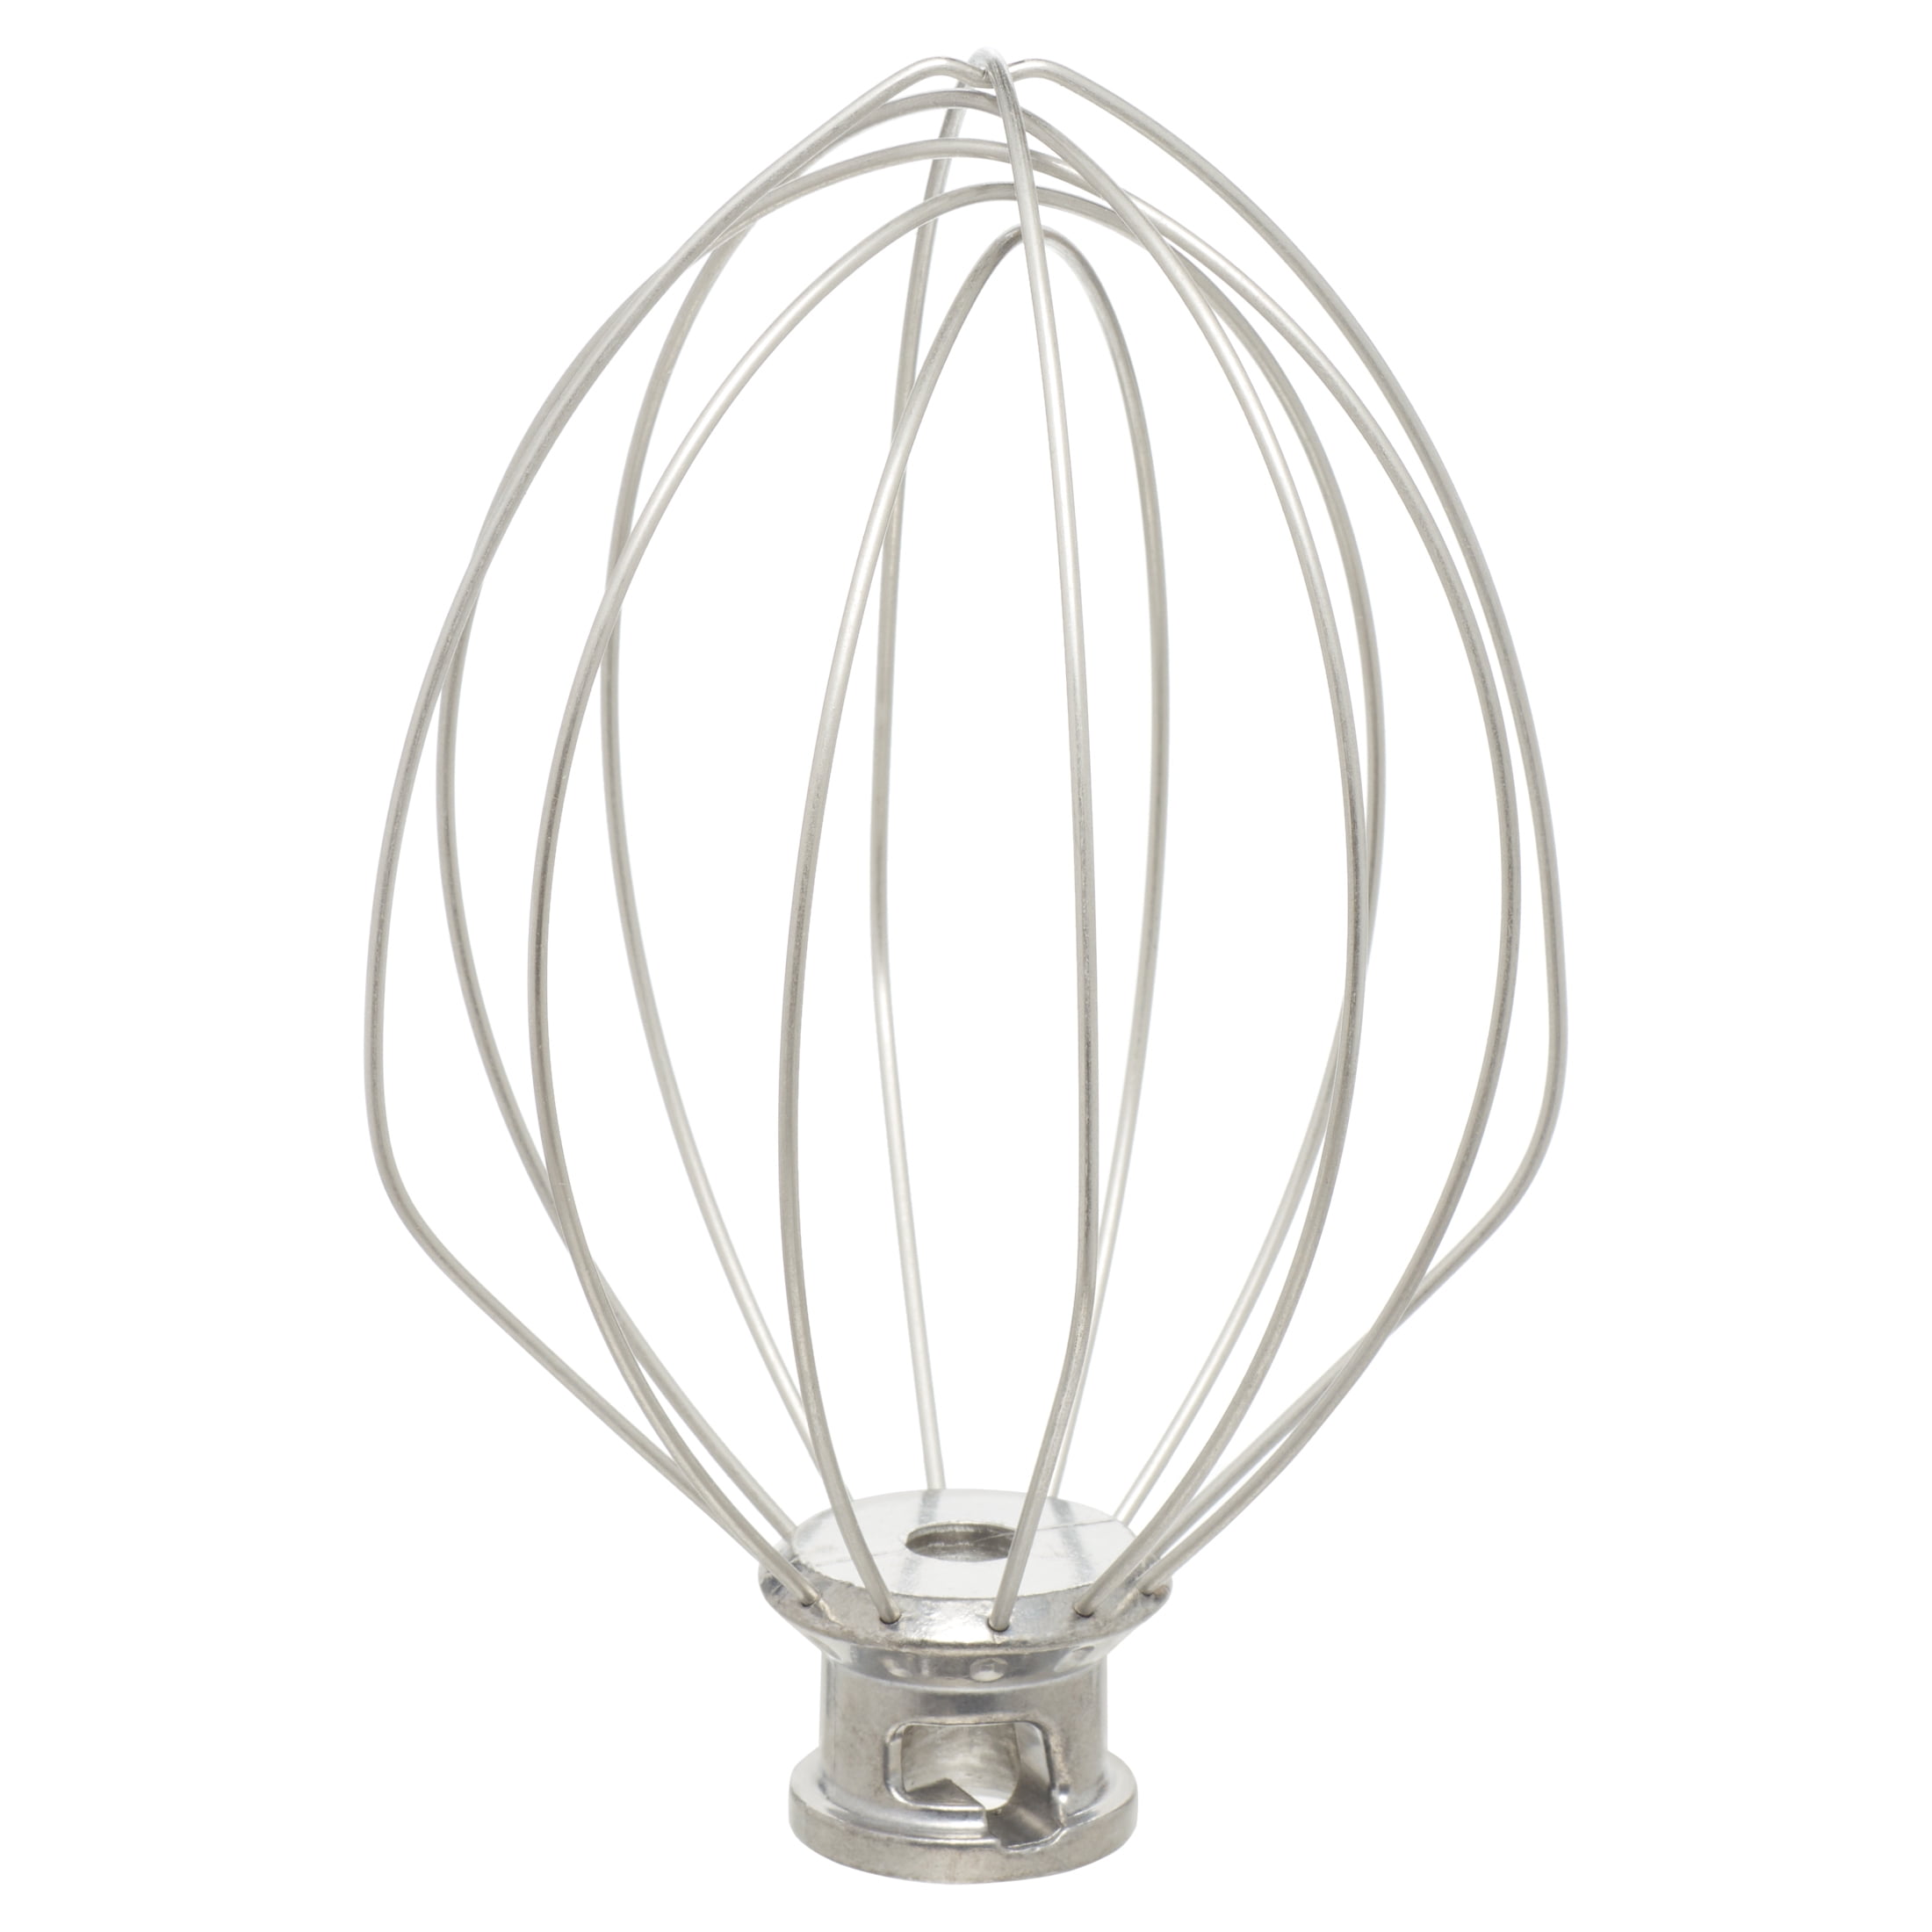 KitchenAid 6 Wire Whip (for 5 QT Bowl-Lift Stand Mixer) - Spoons N Spice